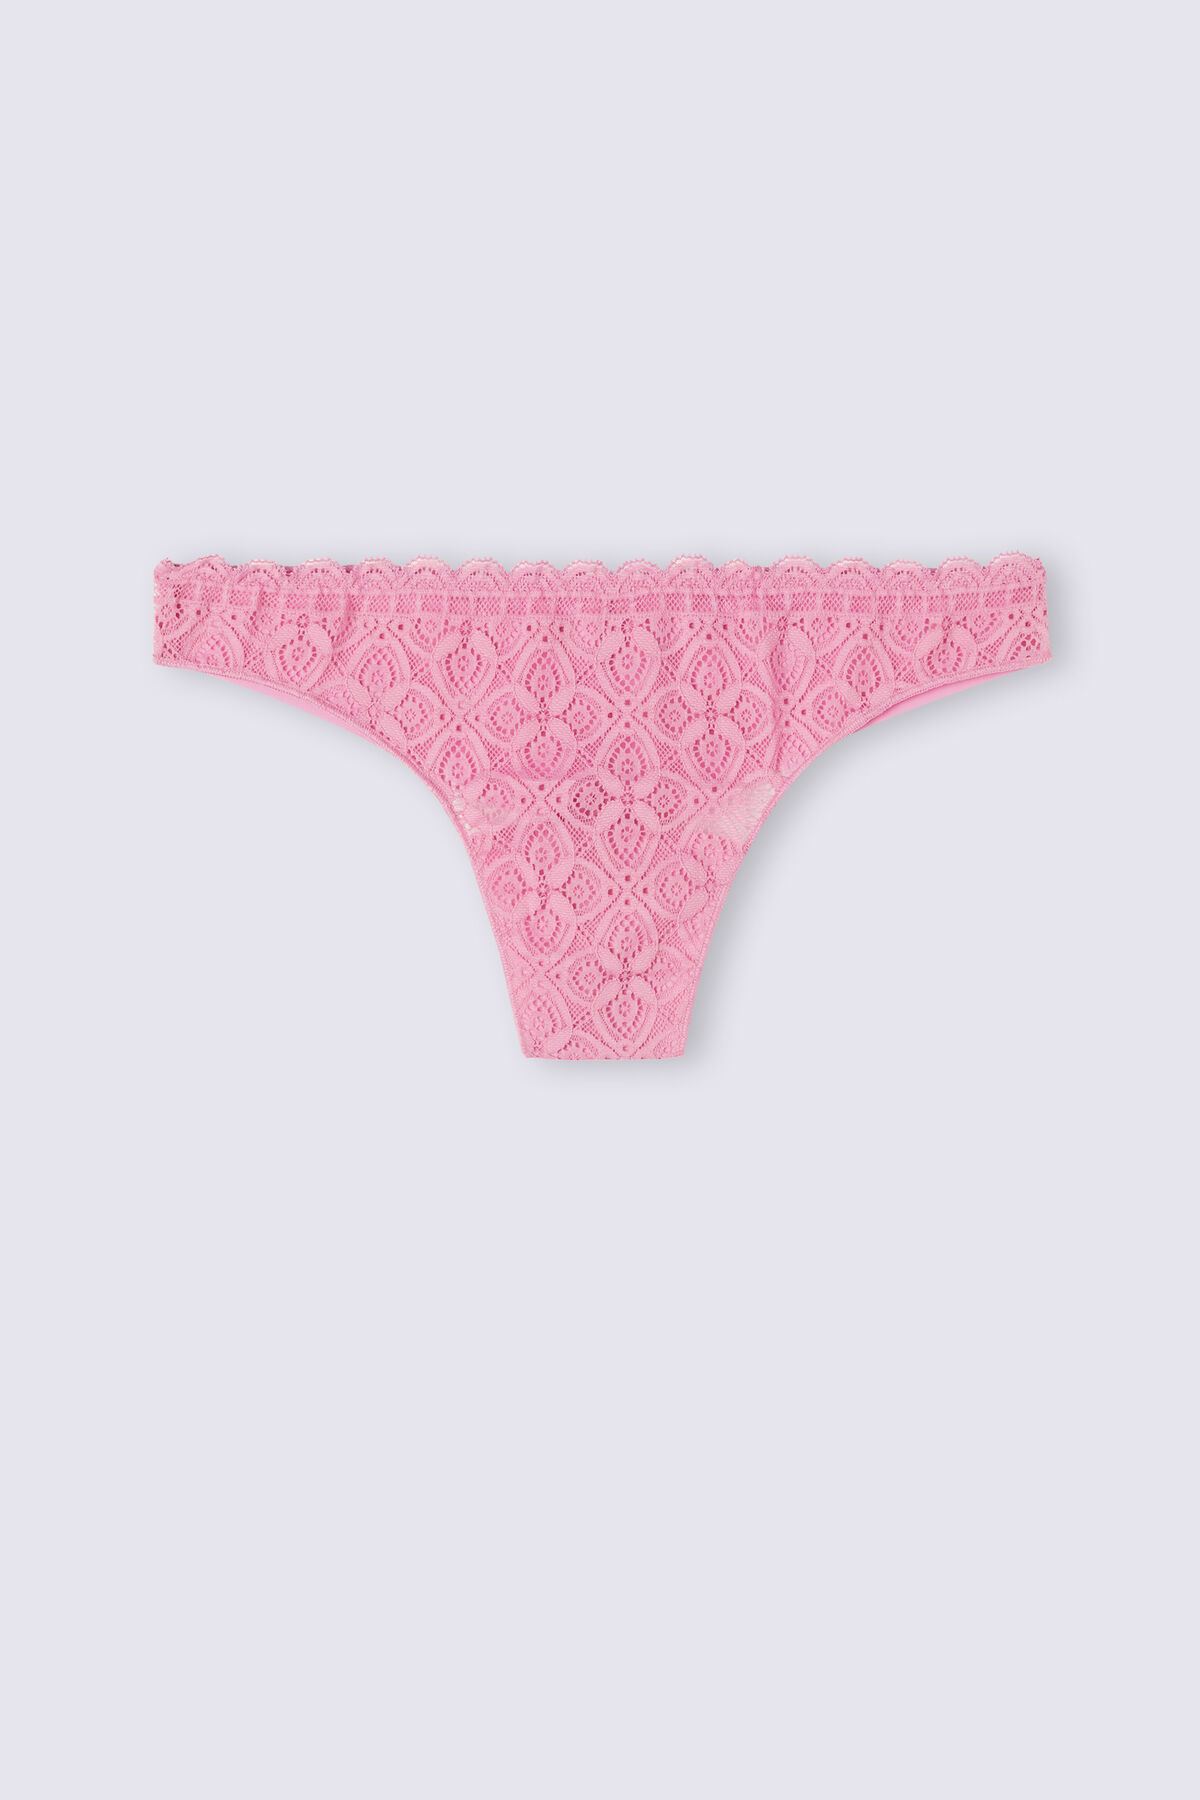 Intimissimi women’s panties | Large selection and High quality